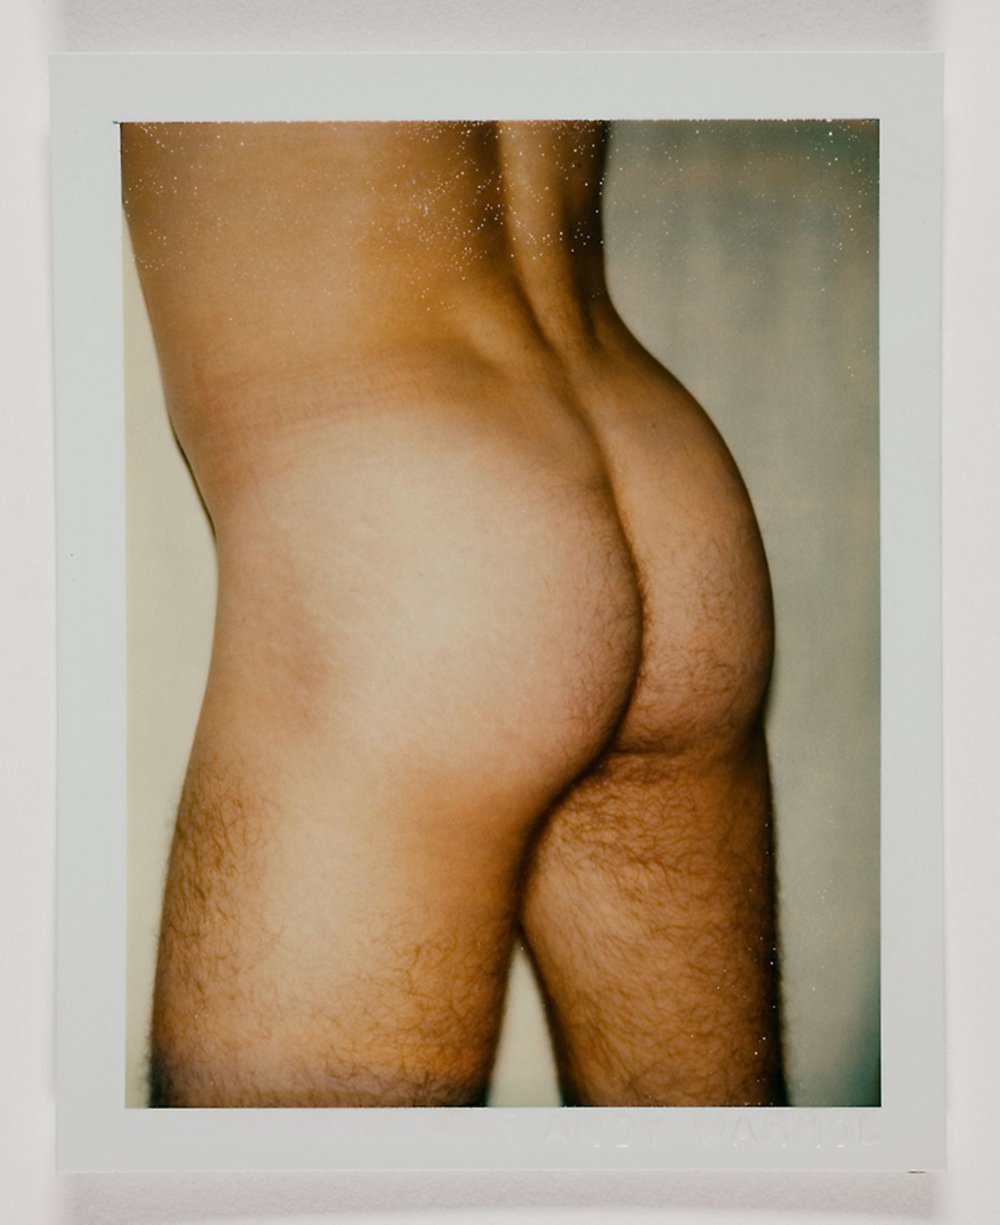 Andy Warhol, Nude Model (Male) 1976, The Andy Warhol Foundation for the Visual Arts, Inc. / Artists Rights Society (ARS), New York